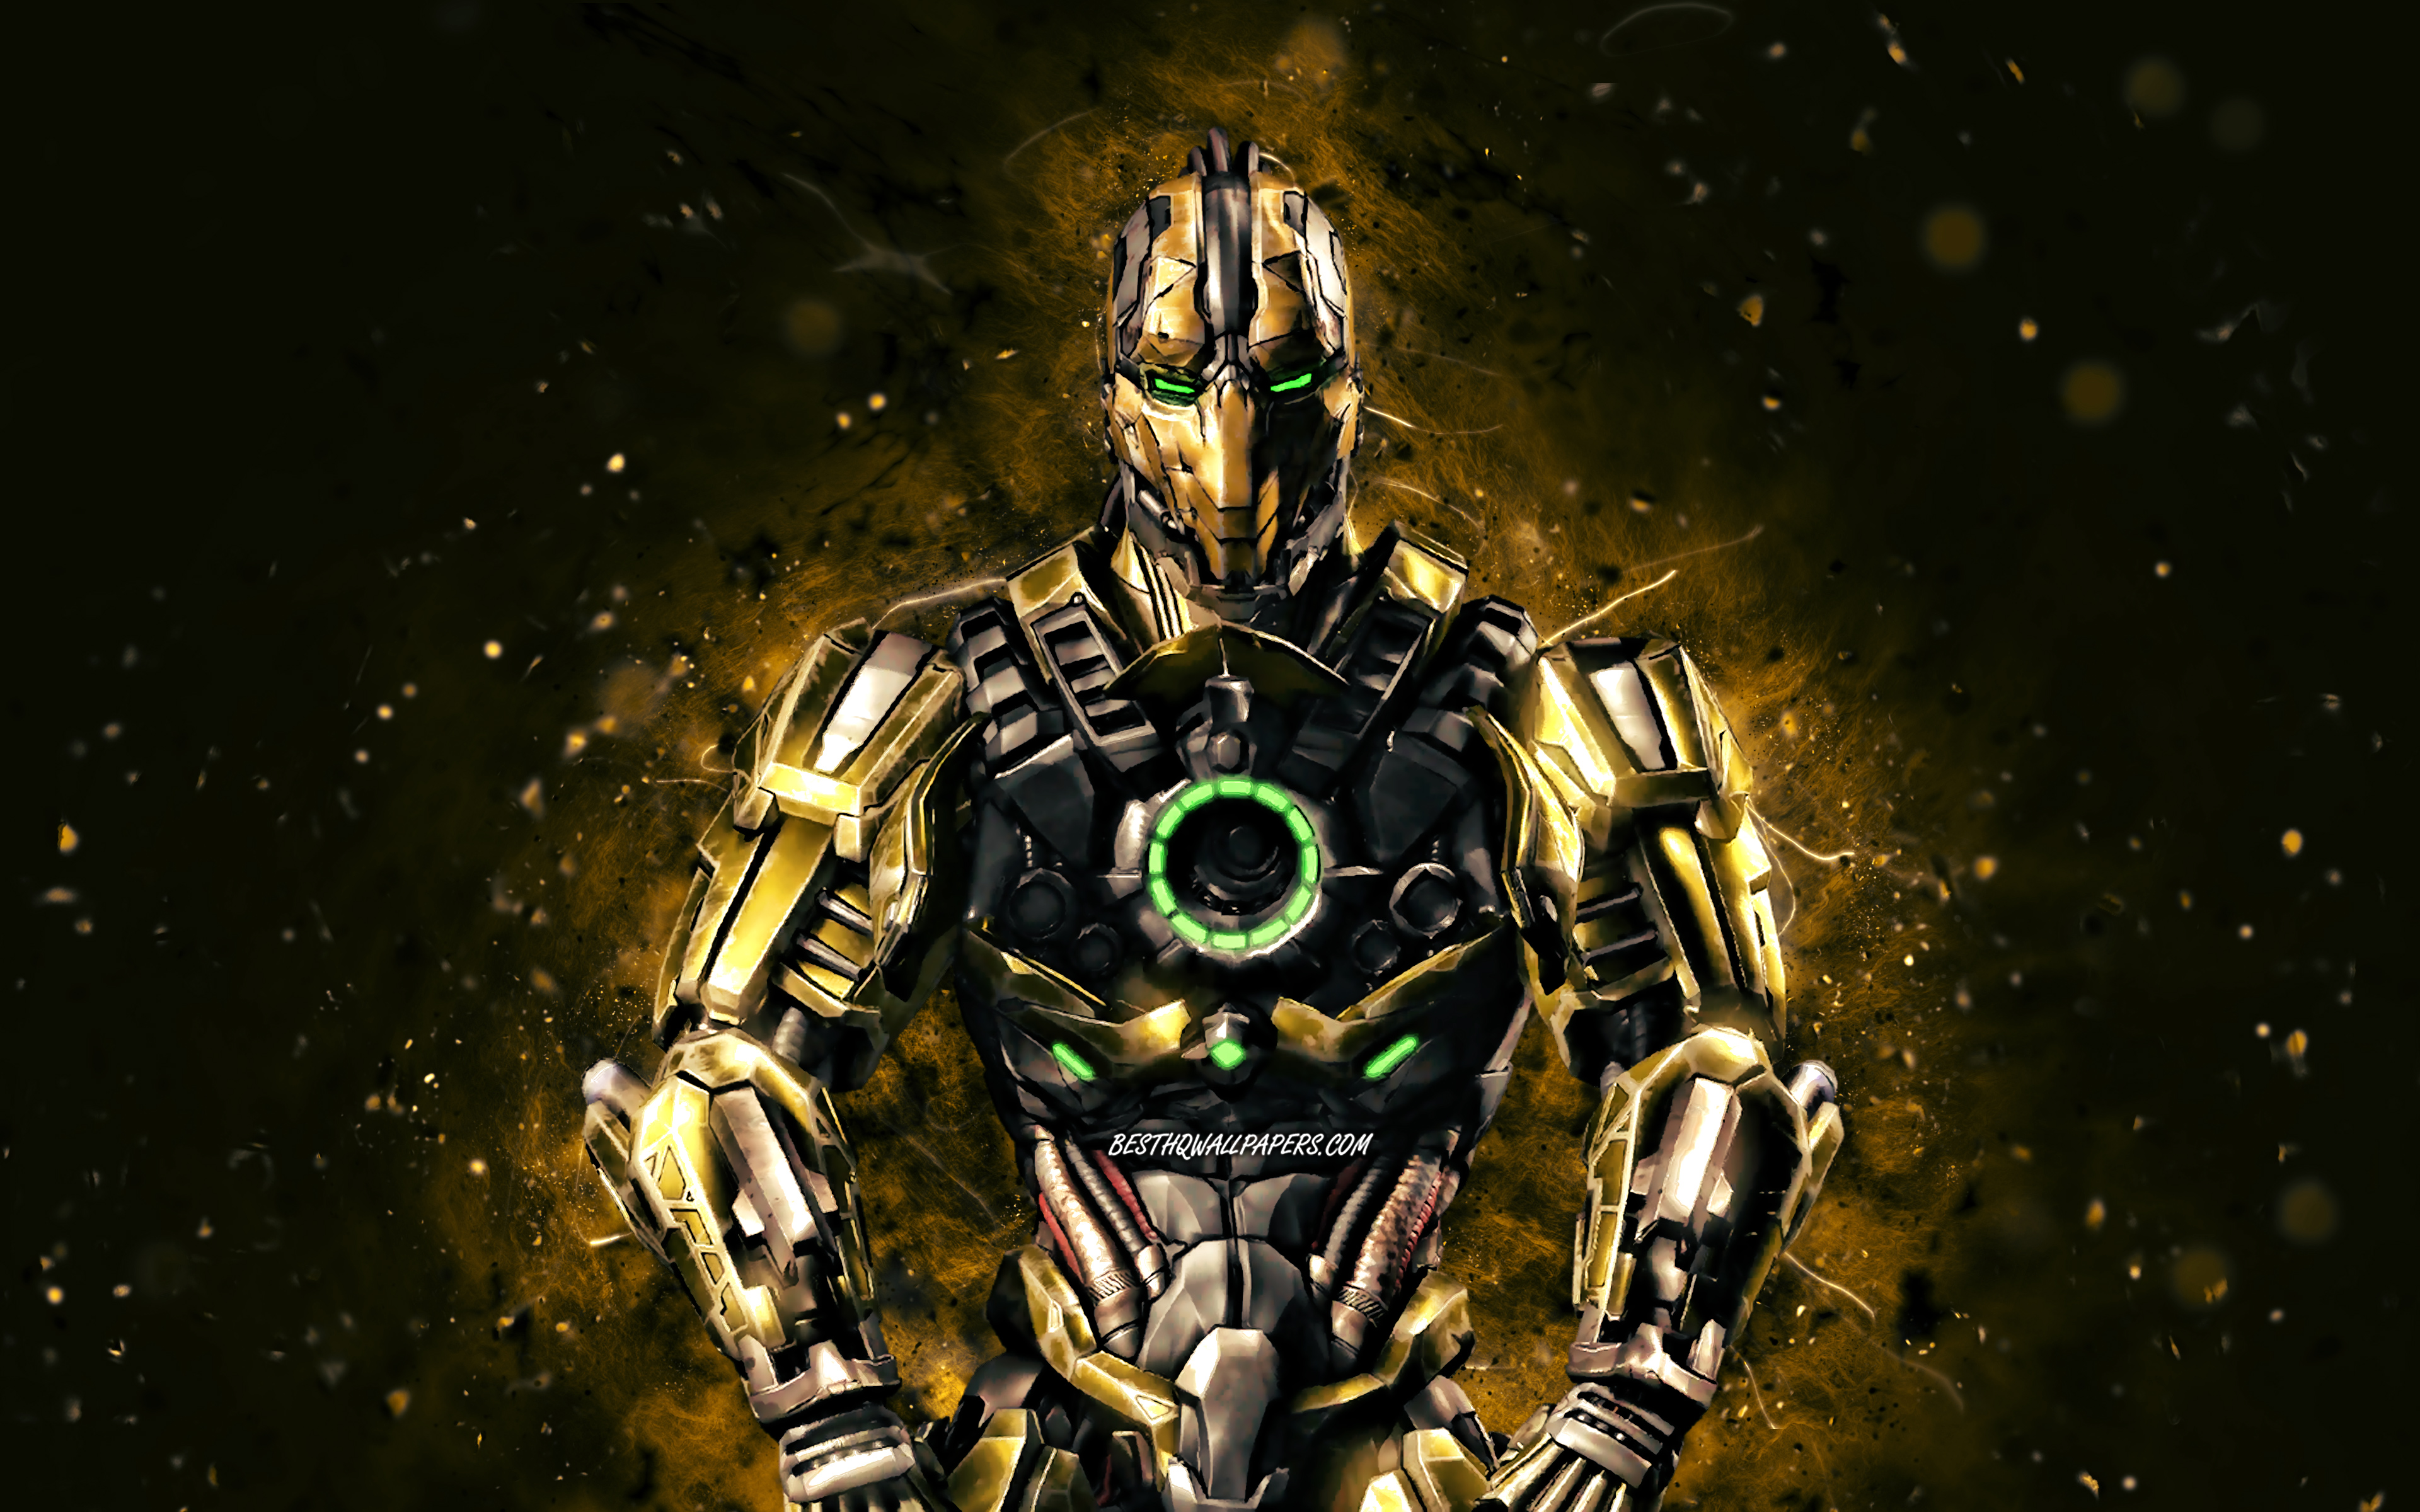 Download wallpaper Cyrax, 4k, brown neon lights, Mortal Kombat Mobile, fighting games, MK Mobile, creative, Mortal Kombat, Cyrax Mortal Kombat for desktop with resolution 3840x2400. High Quality HD picture wallpaper